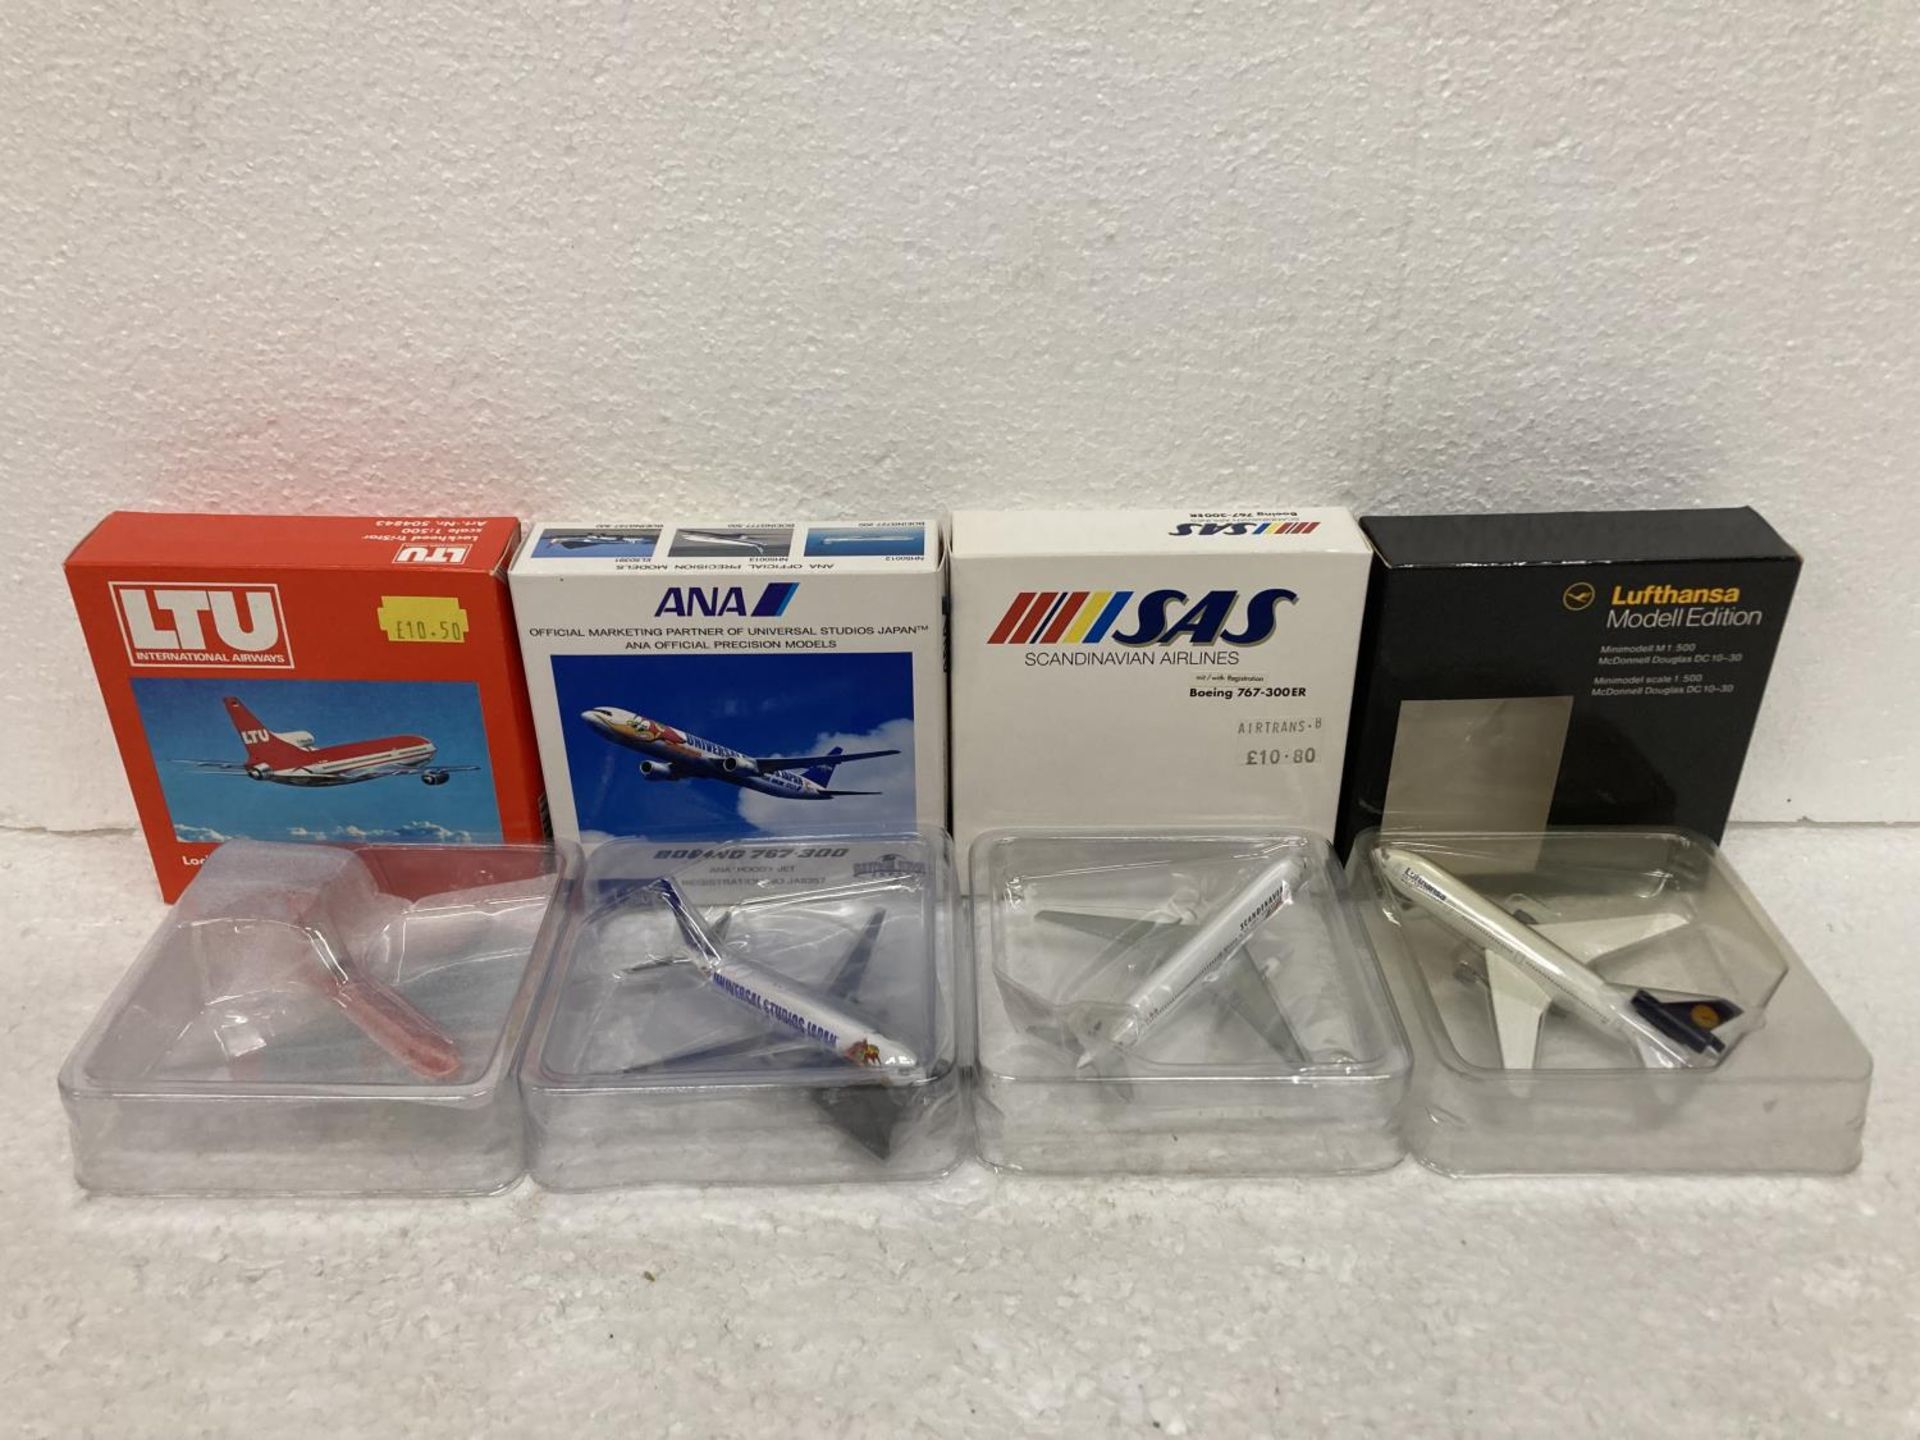 FOUR HERPA WINGS COLLECTION PLANES TO INCLUDE - A LOCKHEED TRISTAR MODEL 504843, ANA UNIVERSAL